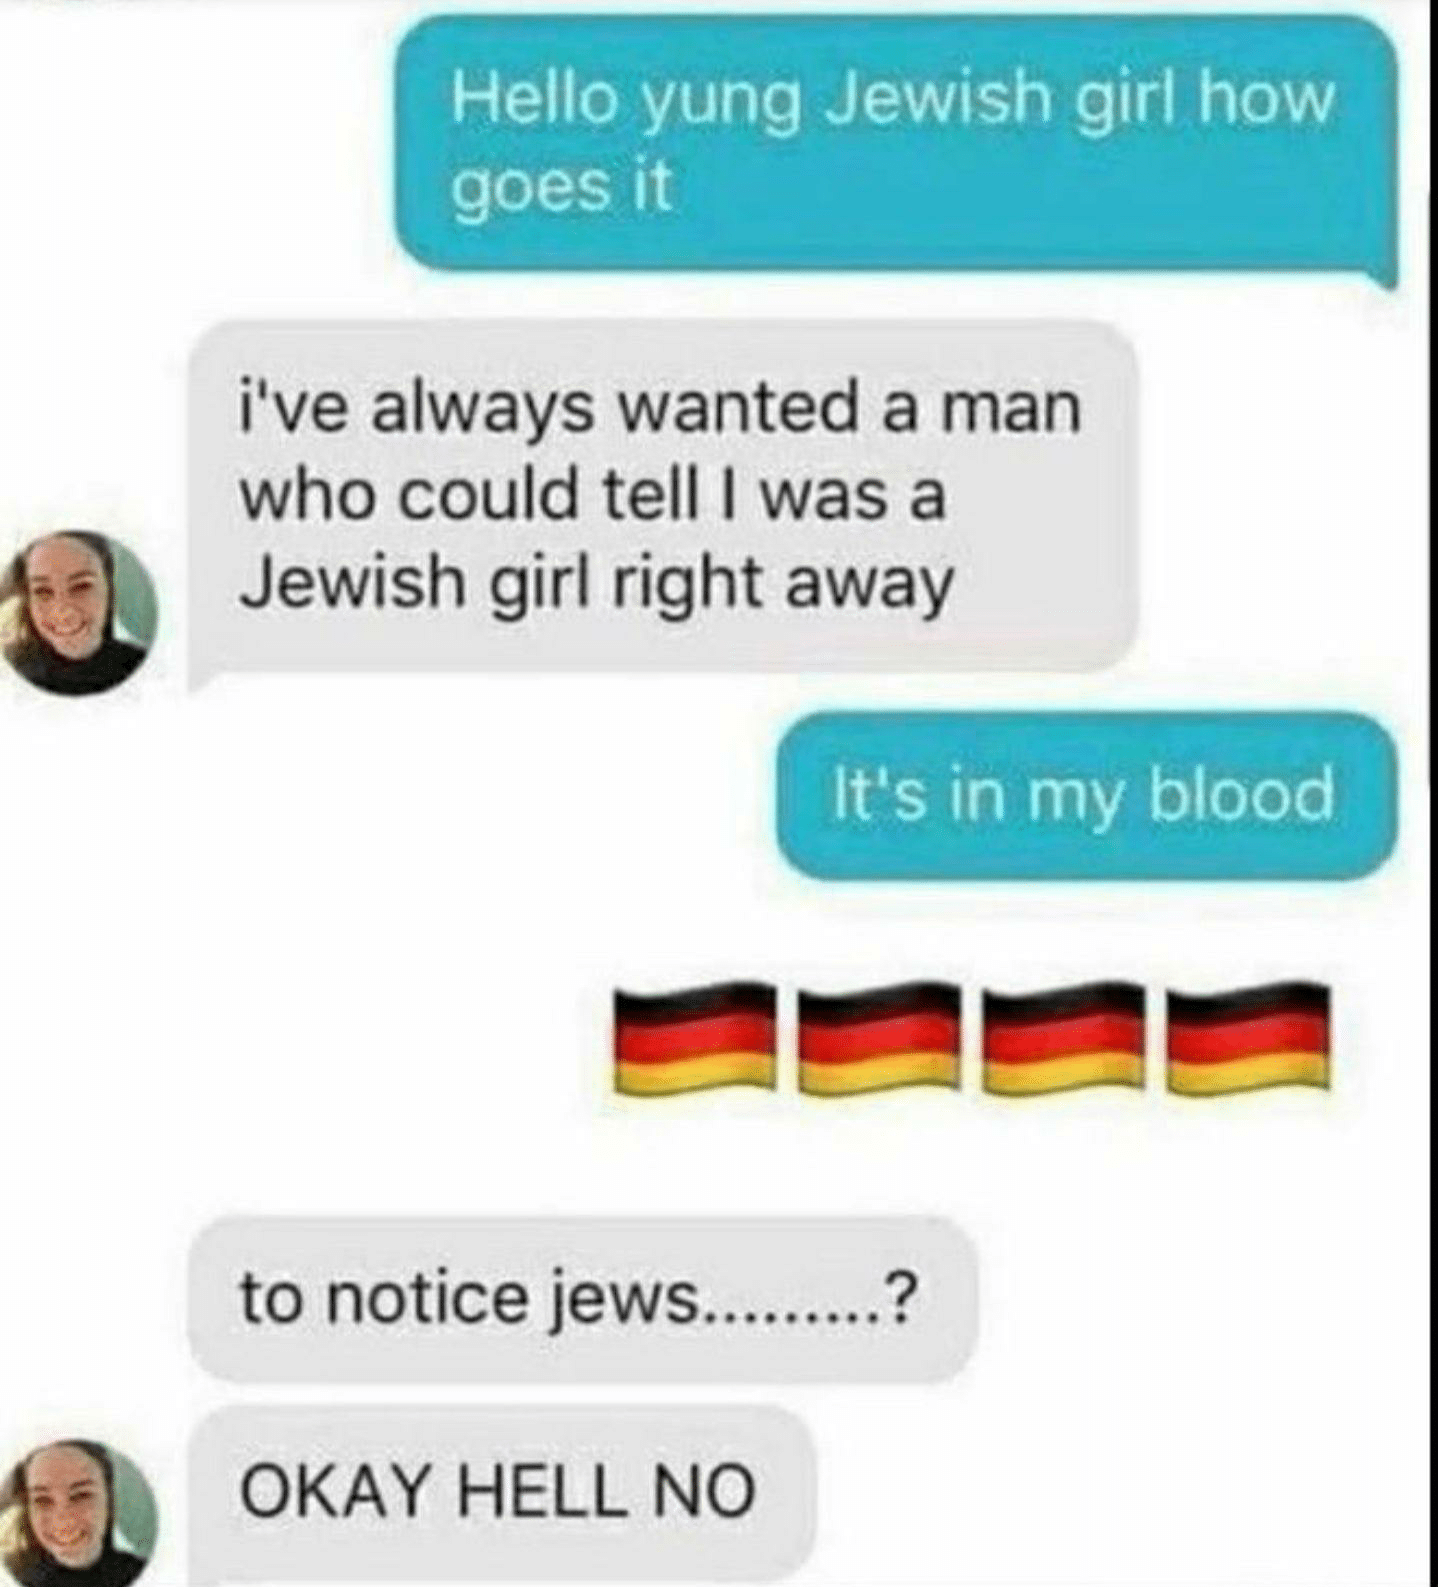 Hold up, Wheel, Spin, HolUp, German, Thanks Dank Memes Hold up, Wheel, Spin, HolUp, German, Thanks text: Hello yung Jewish girl how goes it iive always wanted a man who could tell I was a Jewish girl right away It's in my blood to notice jews OKAY HELL NO 